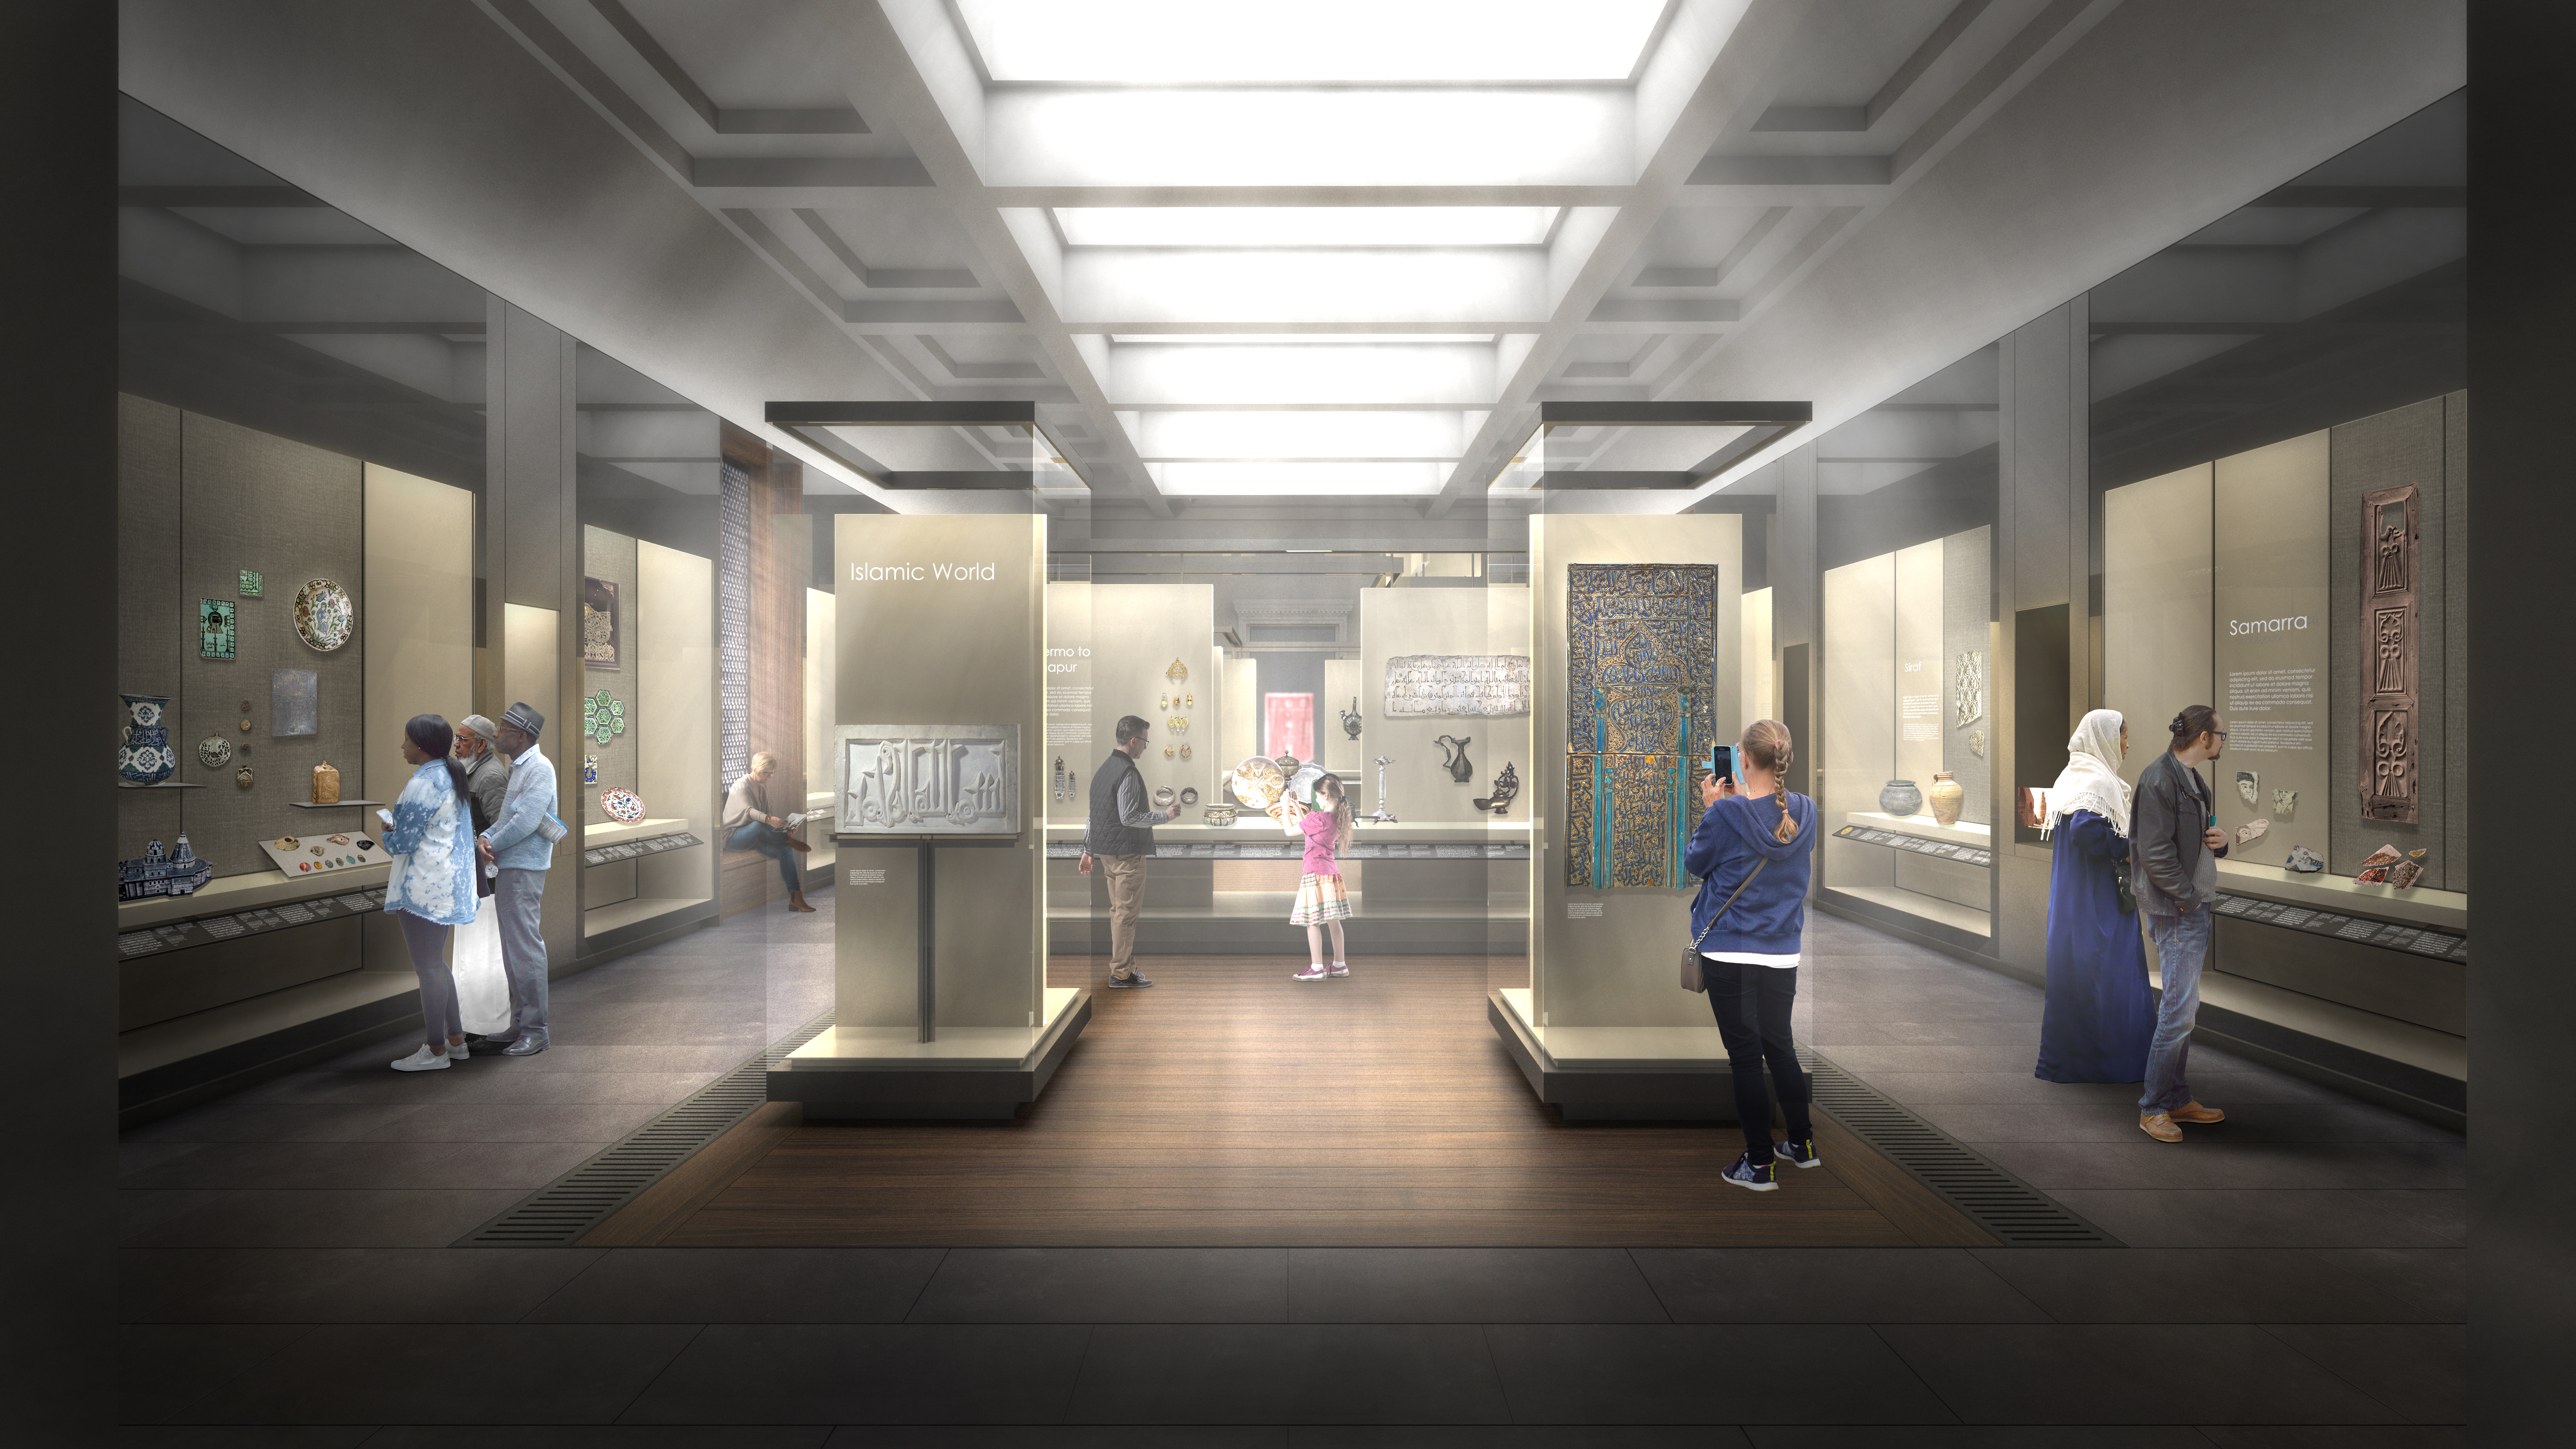 The British Museum will be opening its Islamic Gallery (Stanton Williams)